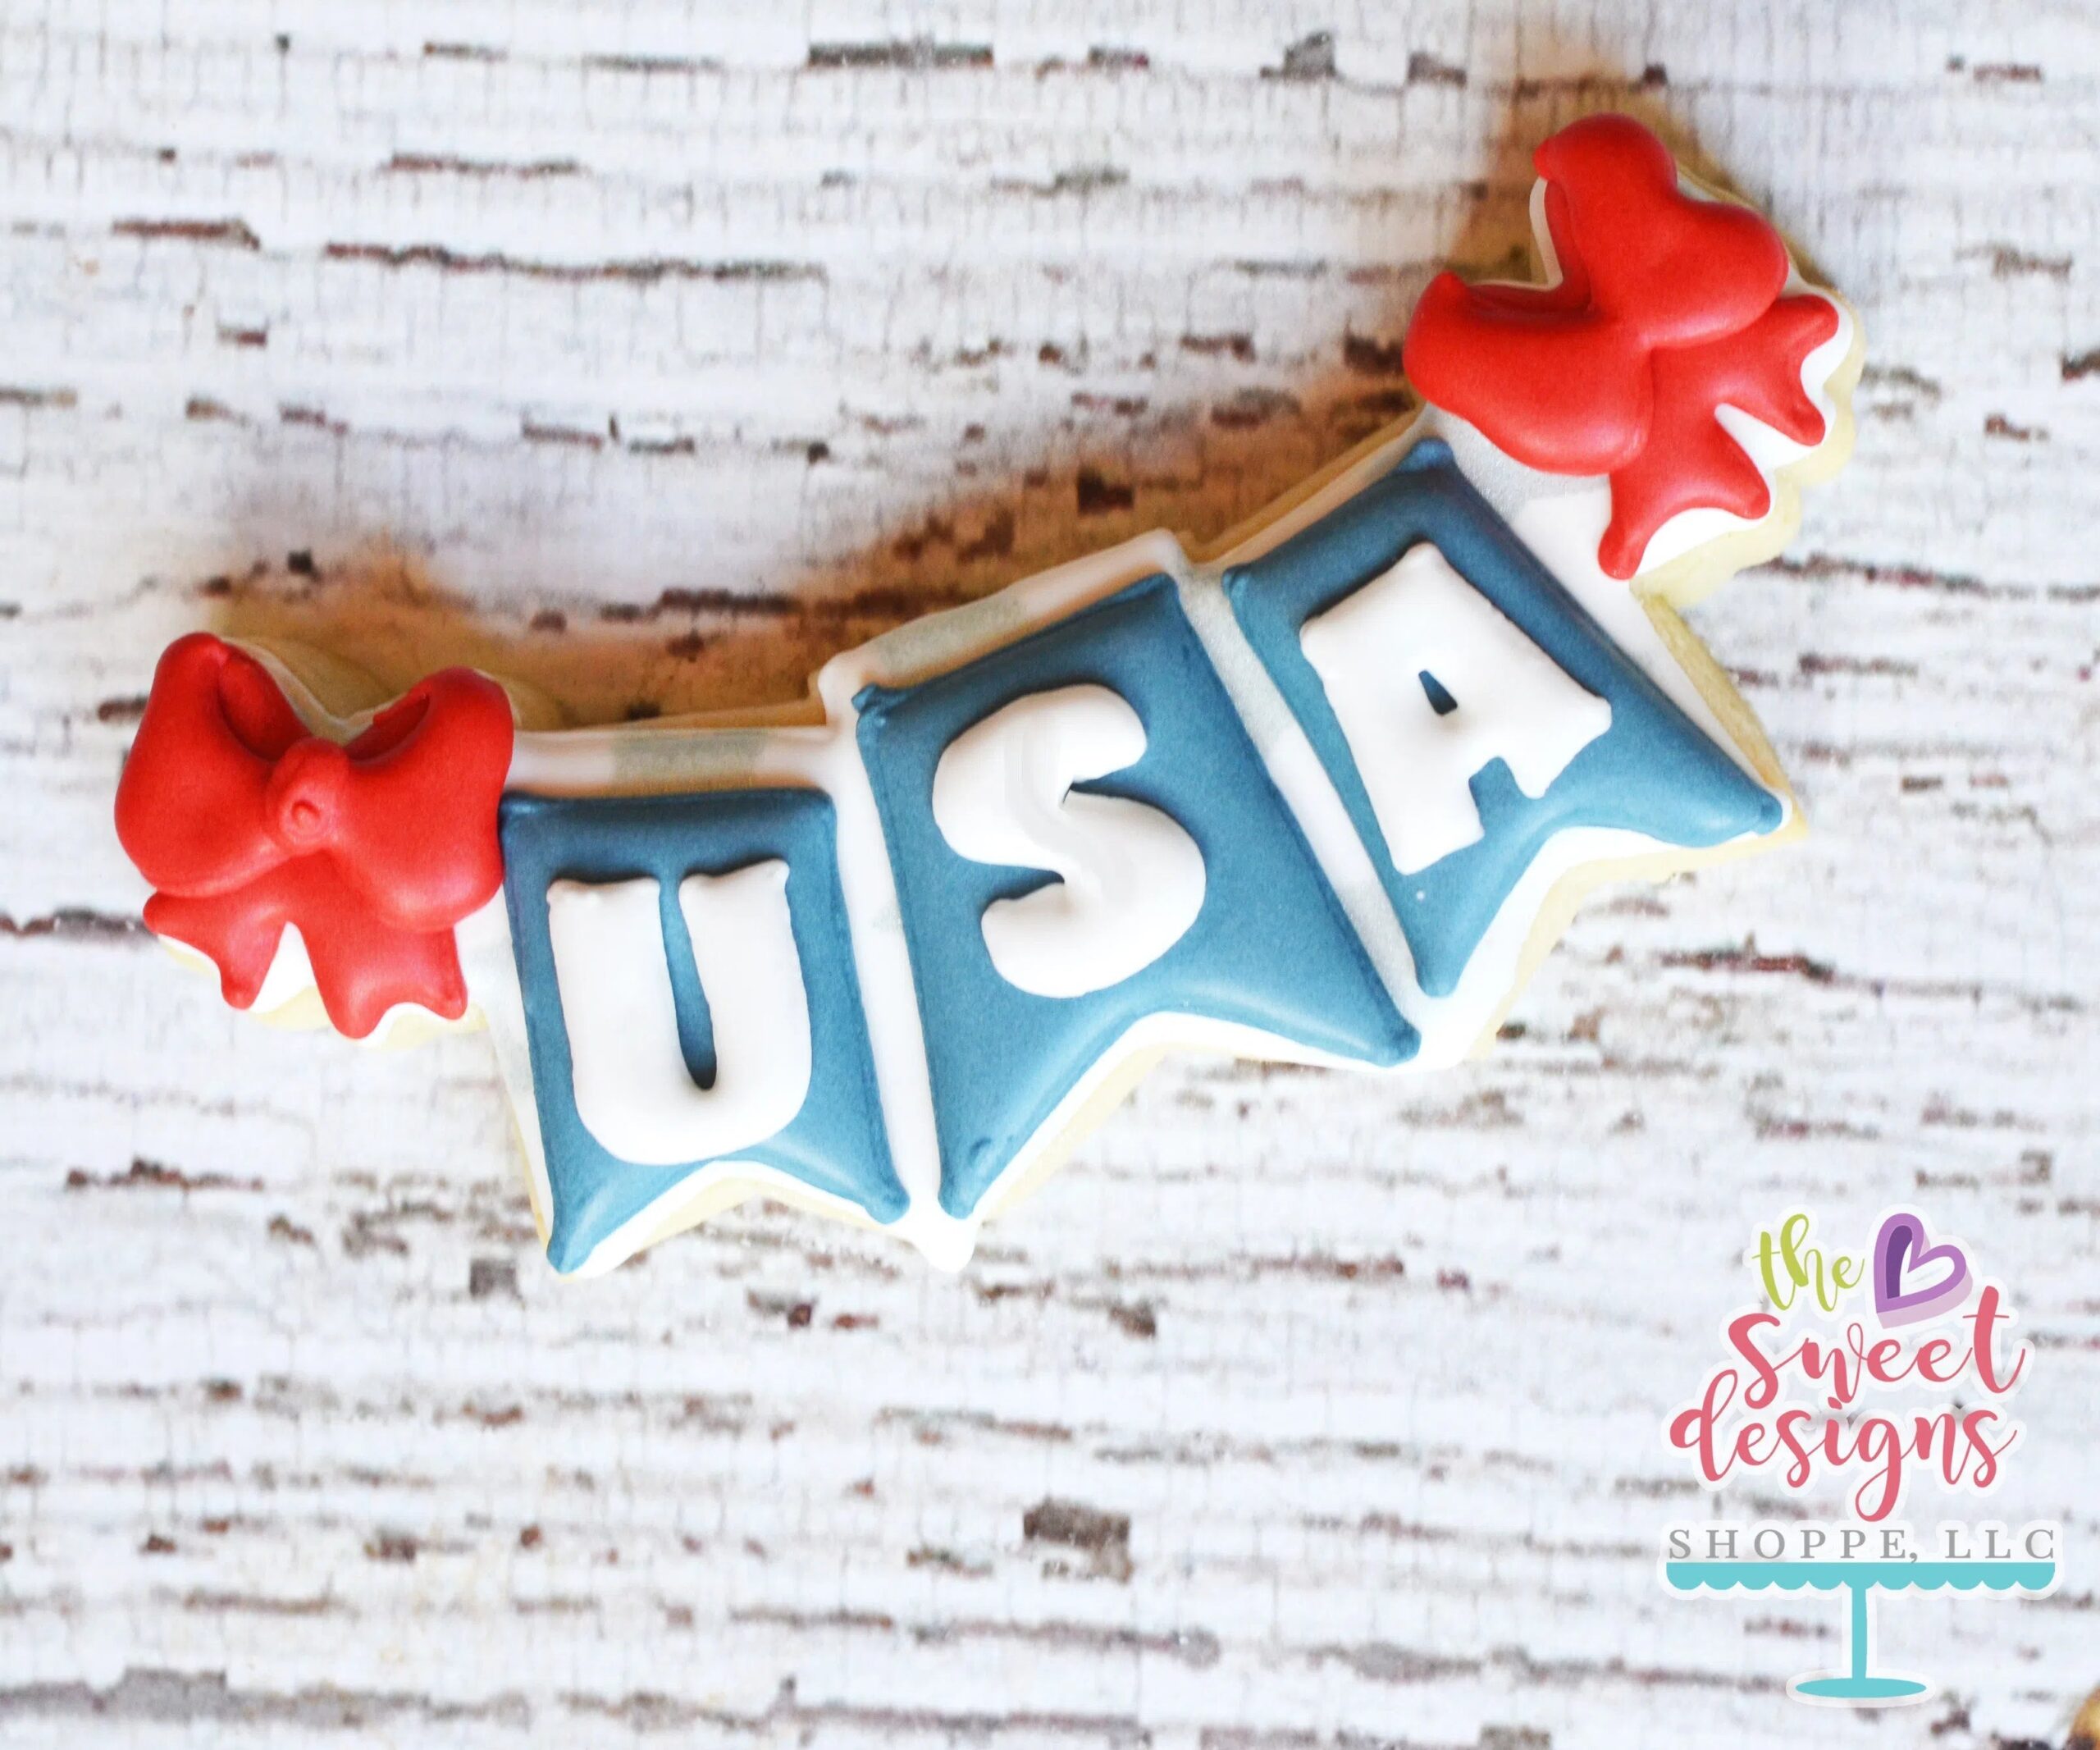 Cookie Cutters - Bunting (three spaces) V2 - Cookie Cutter - Sweet Designs Shoppe - - ALL, Bunting, Cookie Cutter, cookie cutters, Customize, fourth of July, Independence, Patriotic, Plaque, Promocode